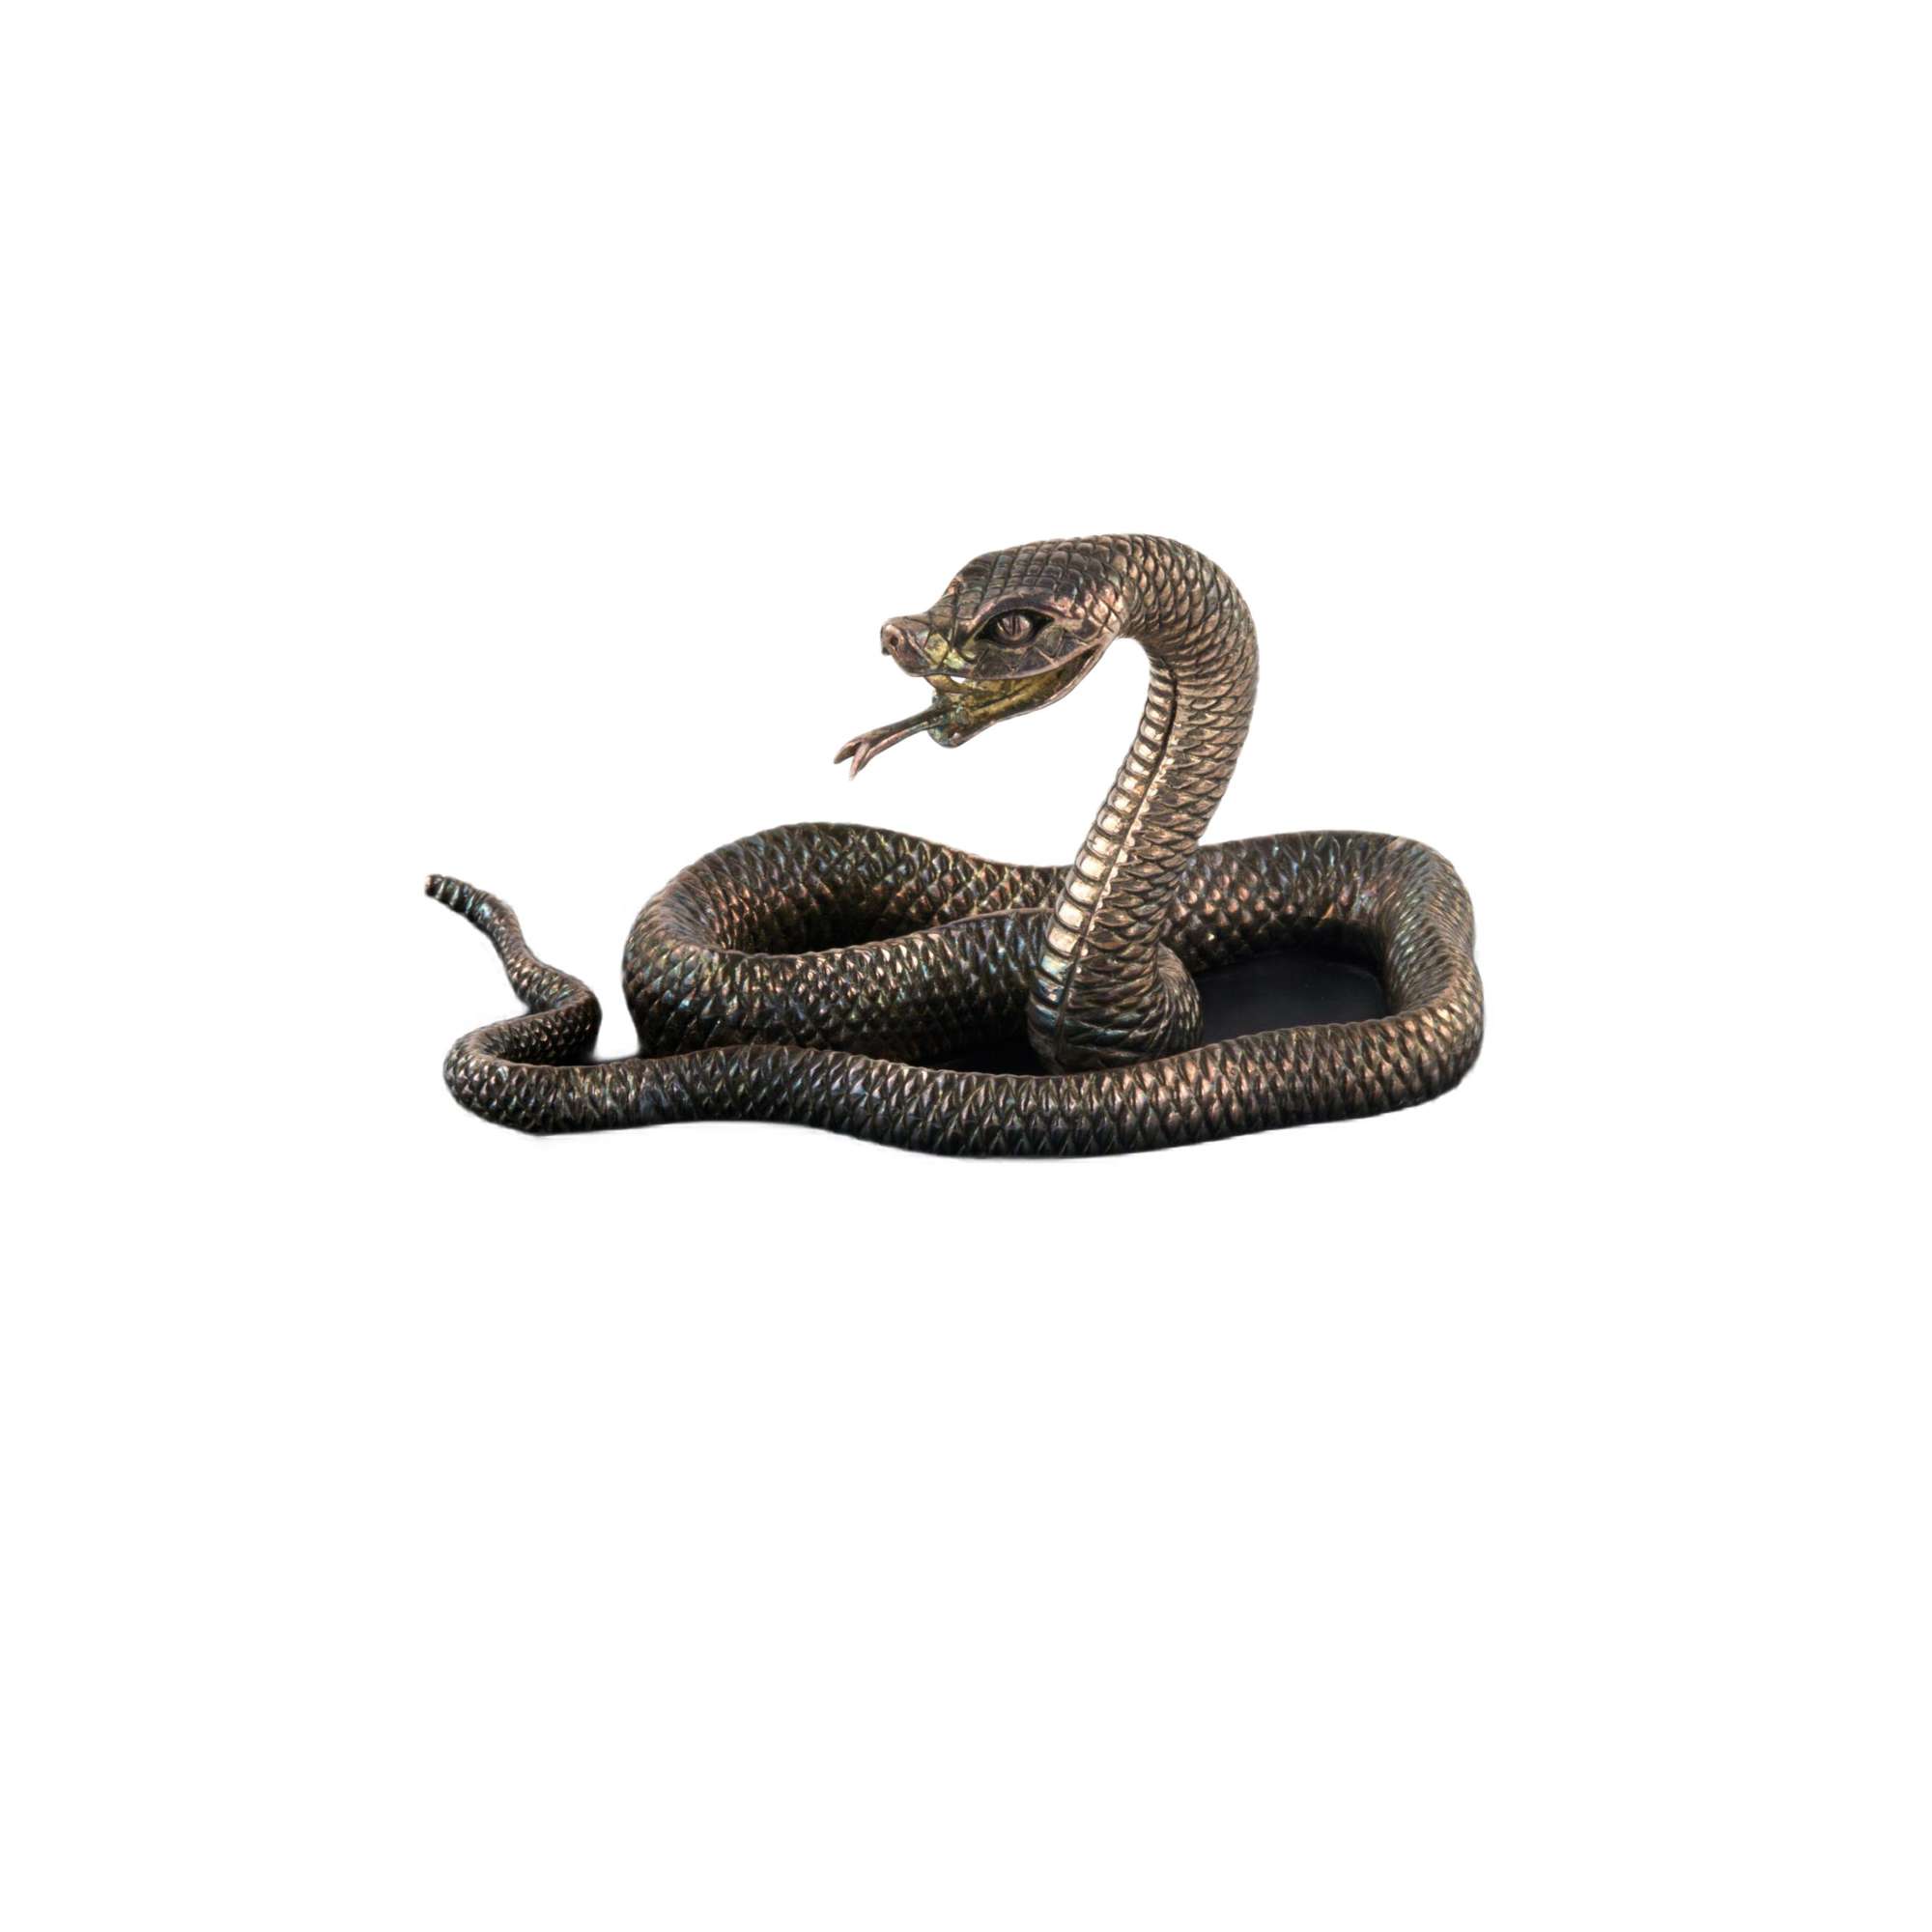 Silver Plated Snake Figure